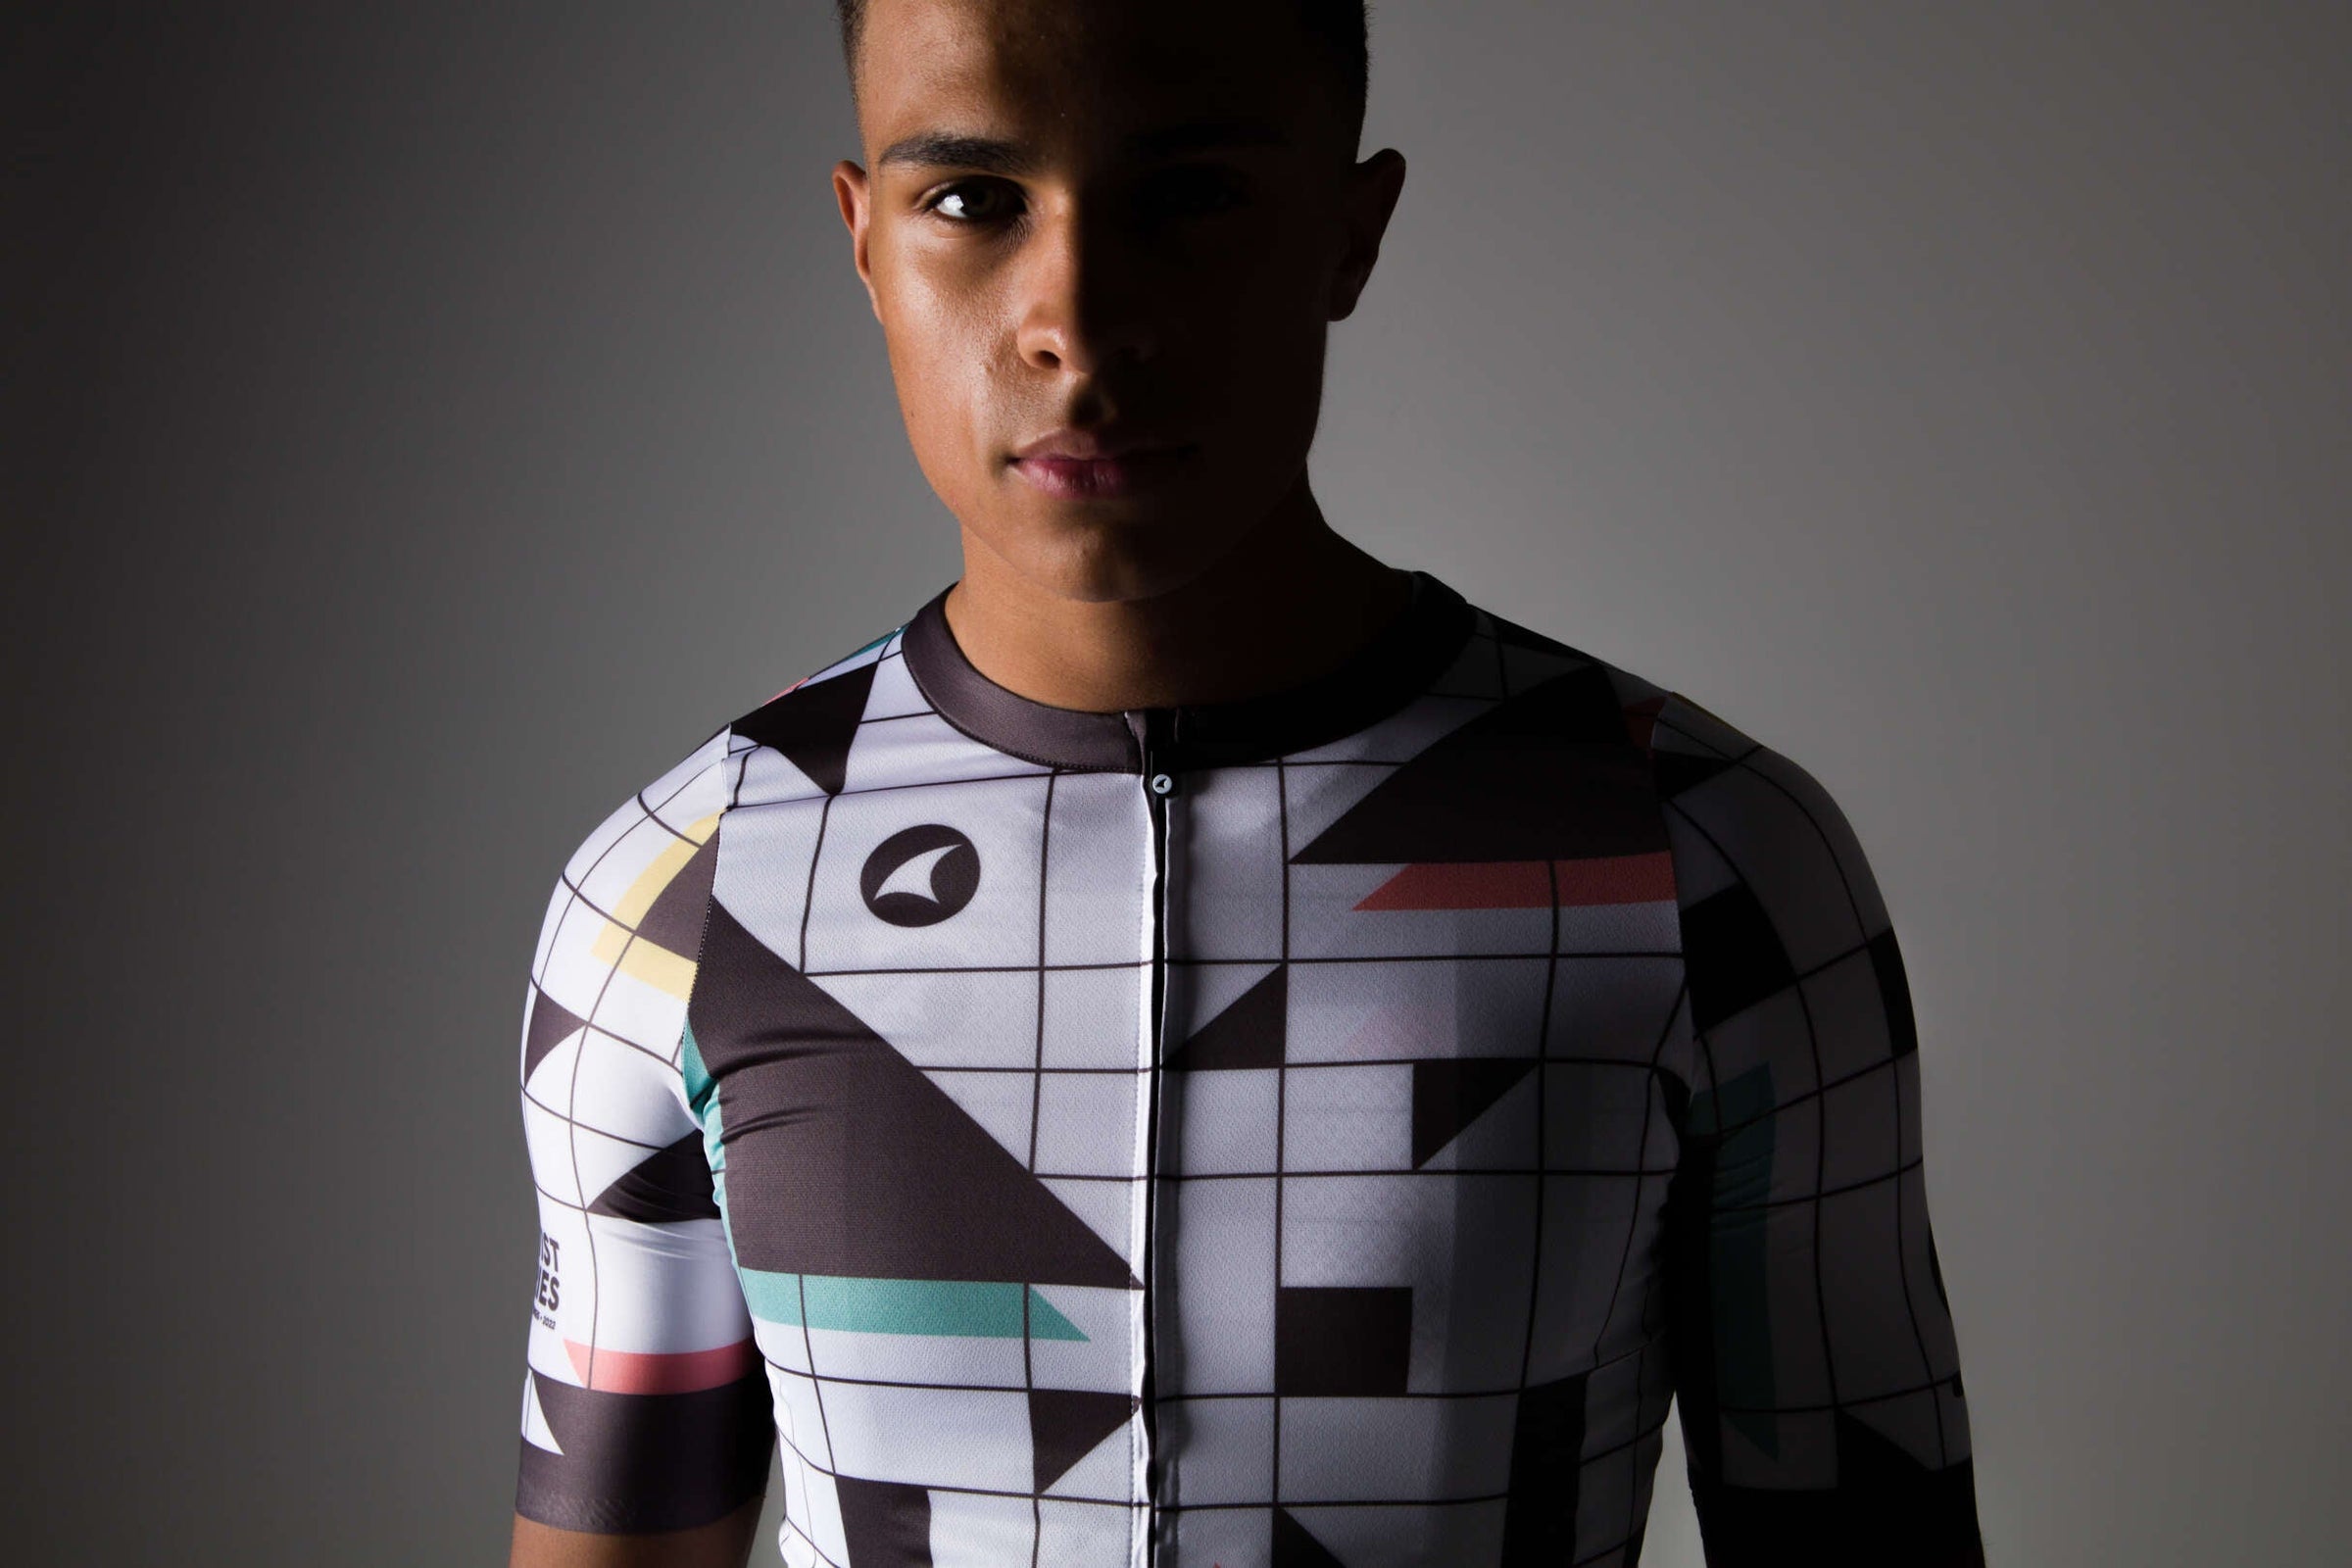 Artist Series Cycling Kits for Men by Pactimo